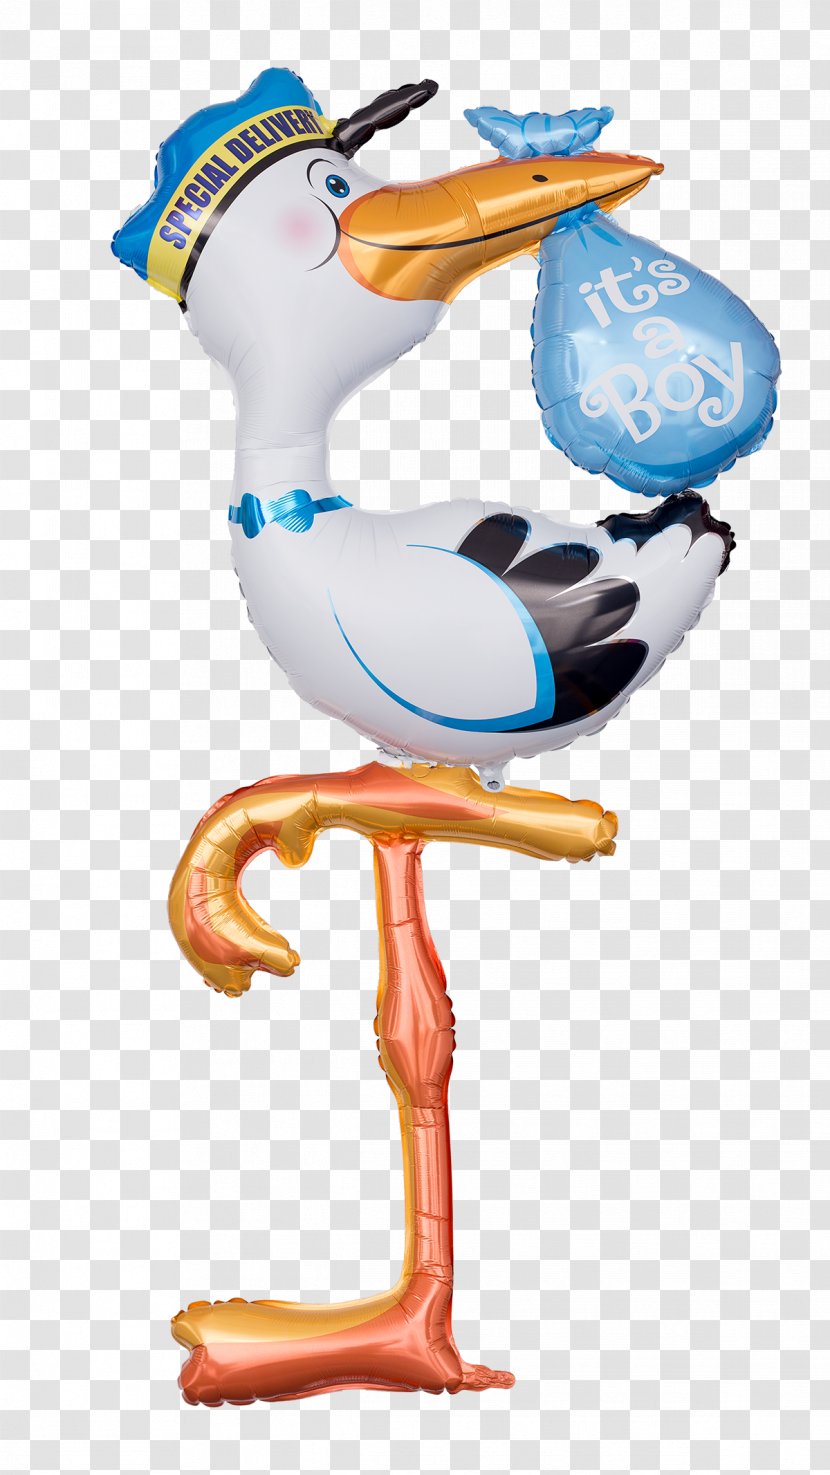 Stork Toy Balloon Infant Gas - Silhouette - Storch HD Transparent PNG